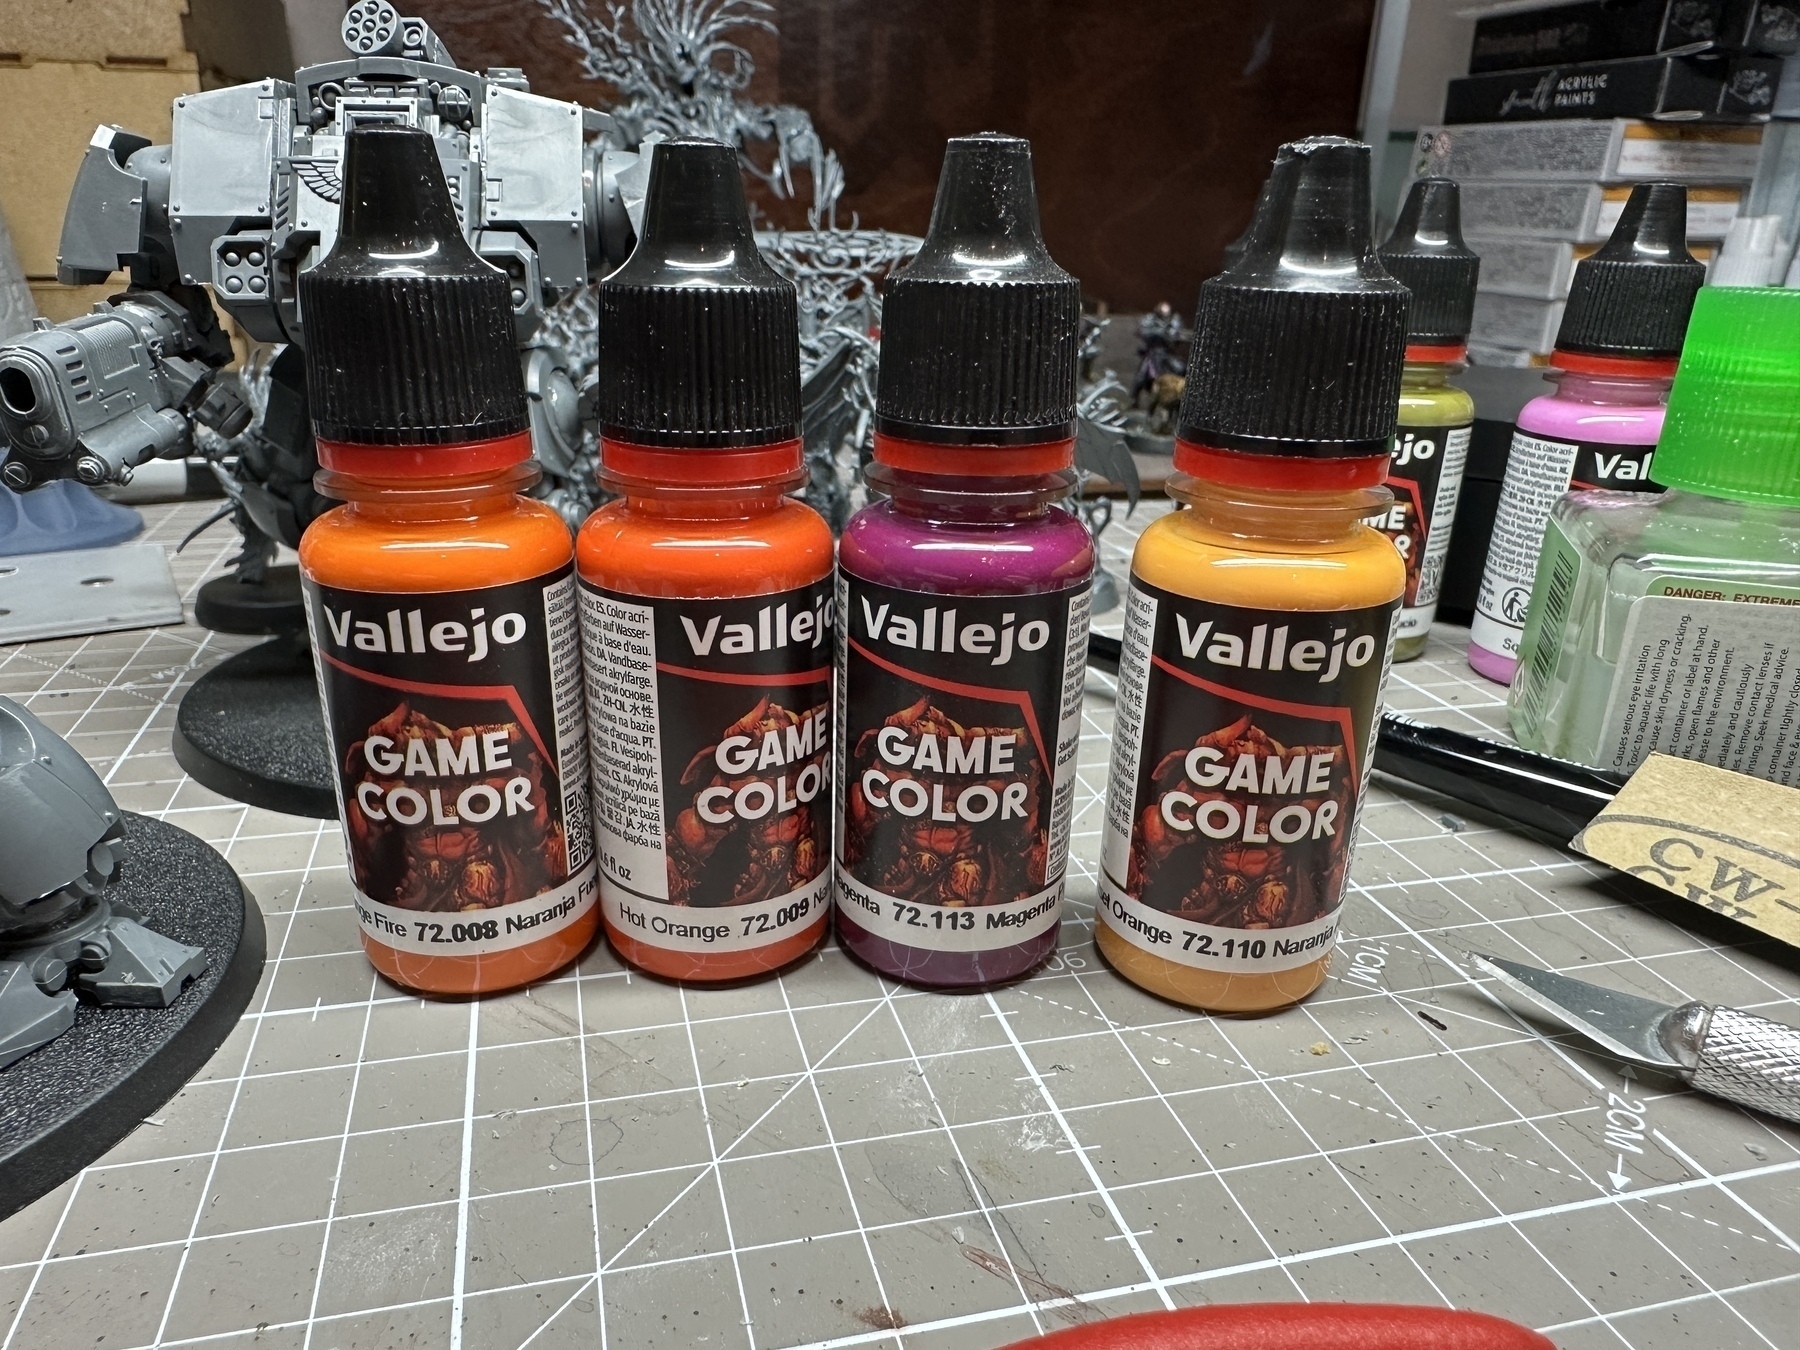 4 Vallejo Game Color paint bottles. Left to right they are: Orange Fire, a bold orange mid-tone; Hot Orange, a bold orange that leans to red; Deep Magenta, which is a darker, slightly purple magenta tone; Sunset Orange, a lighter orange that leans more to yellow